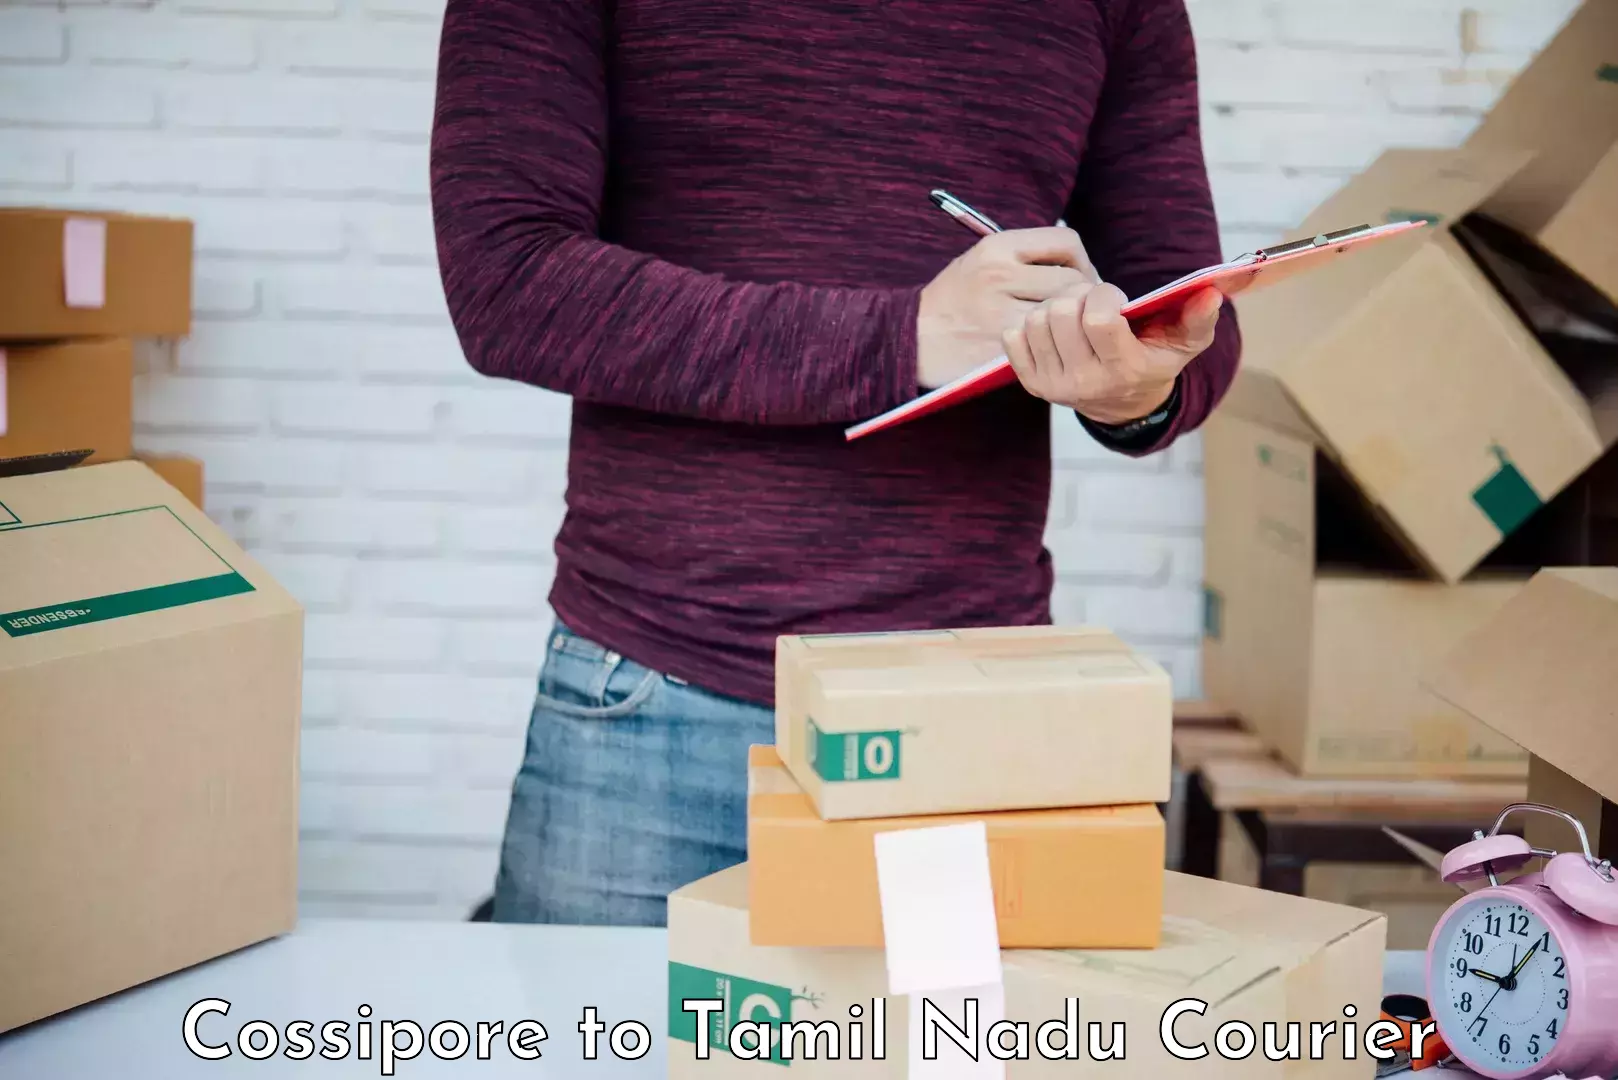 Home goods moving company Cossipore to Chennai Port